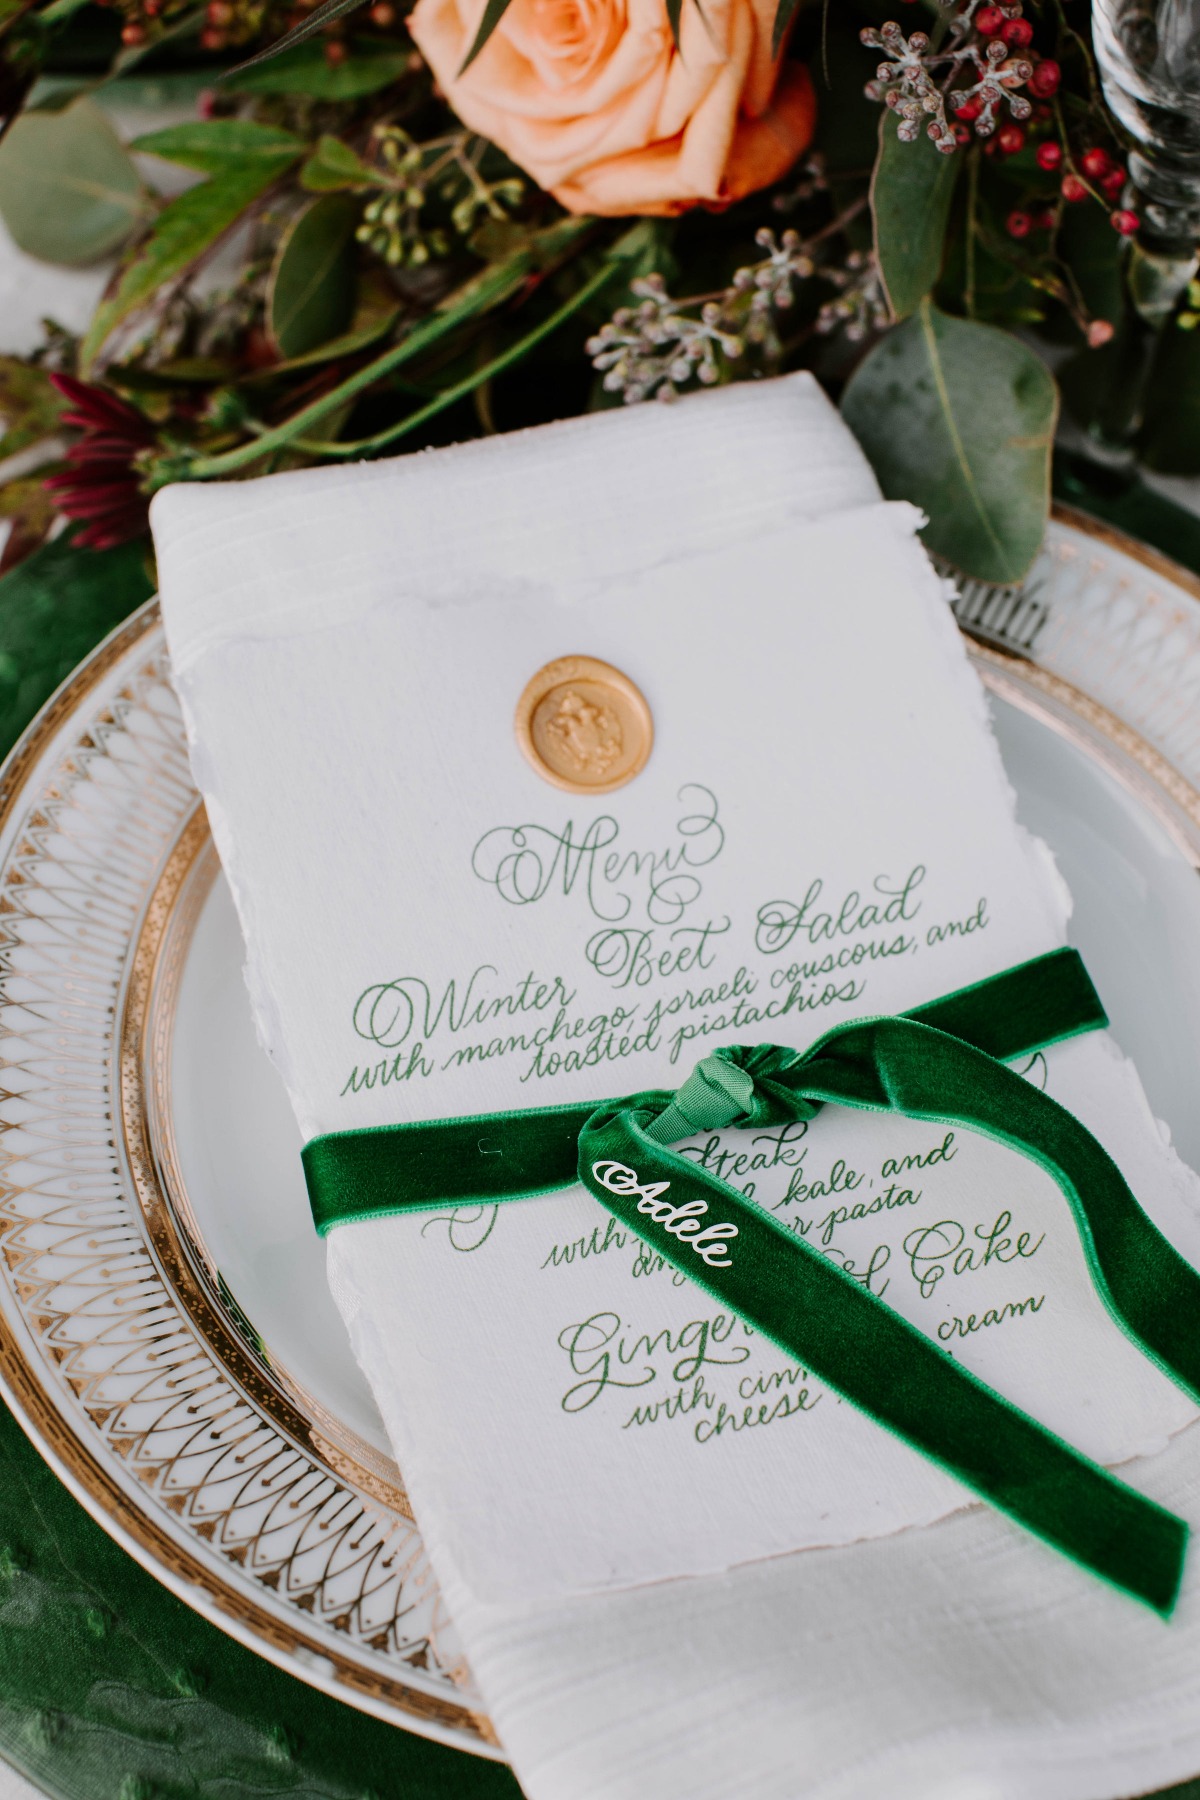 Emerald green and gold place setting for a wedding